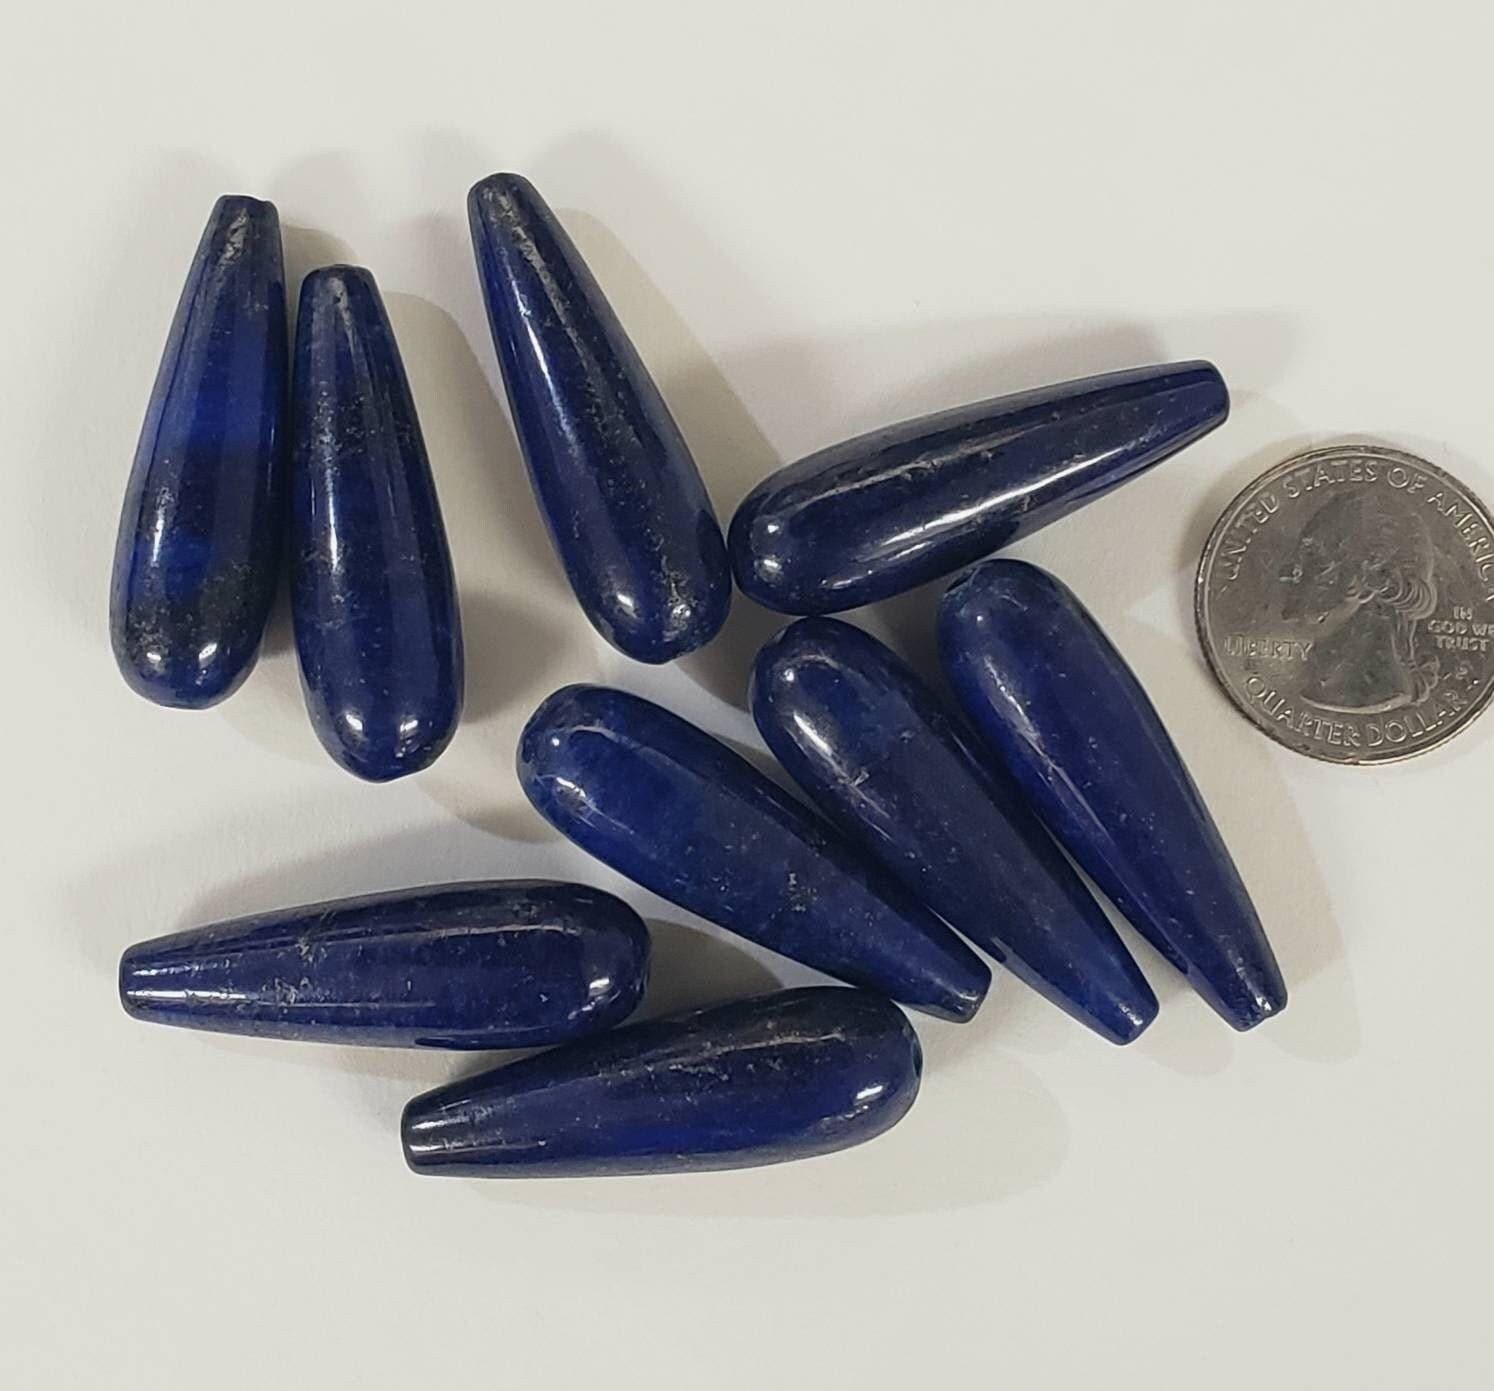 Genuine Lapis Lazuli AA heavy weight 10x39mm long tear drop bead for earrings or pendant making bead, top to bottom drilled.